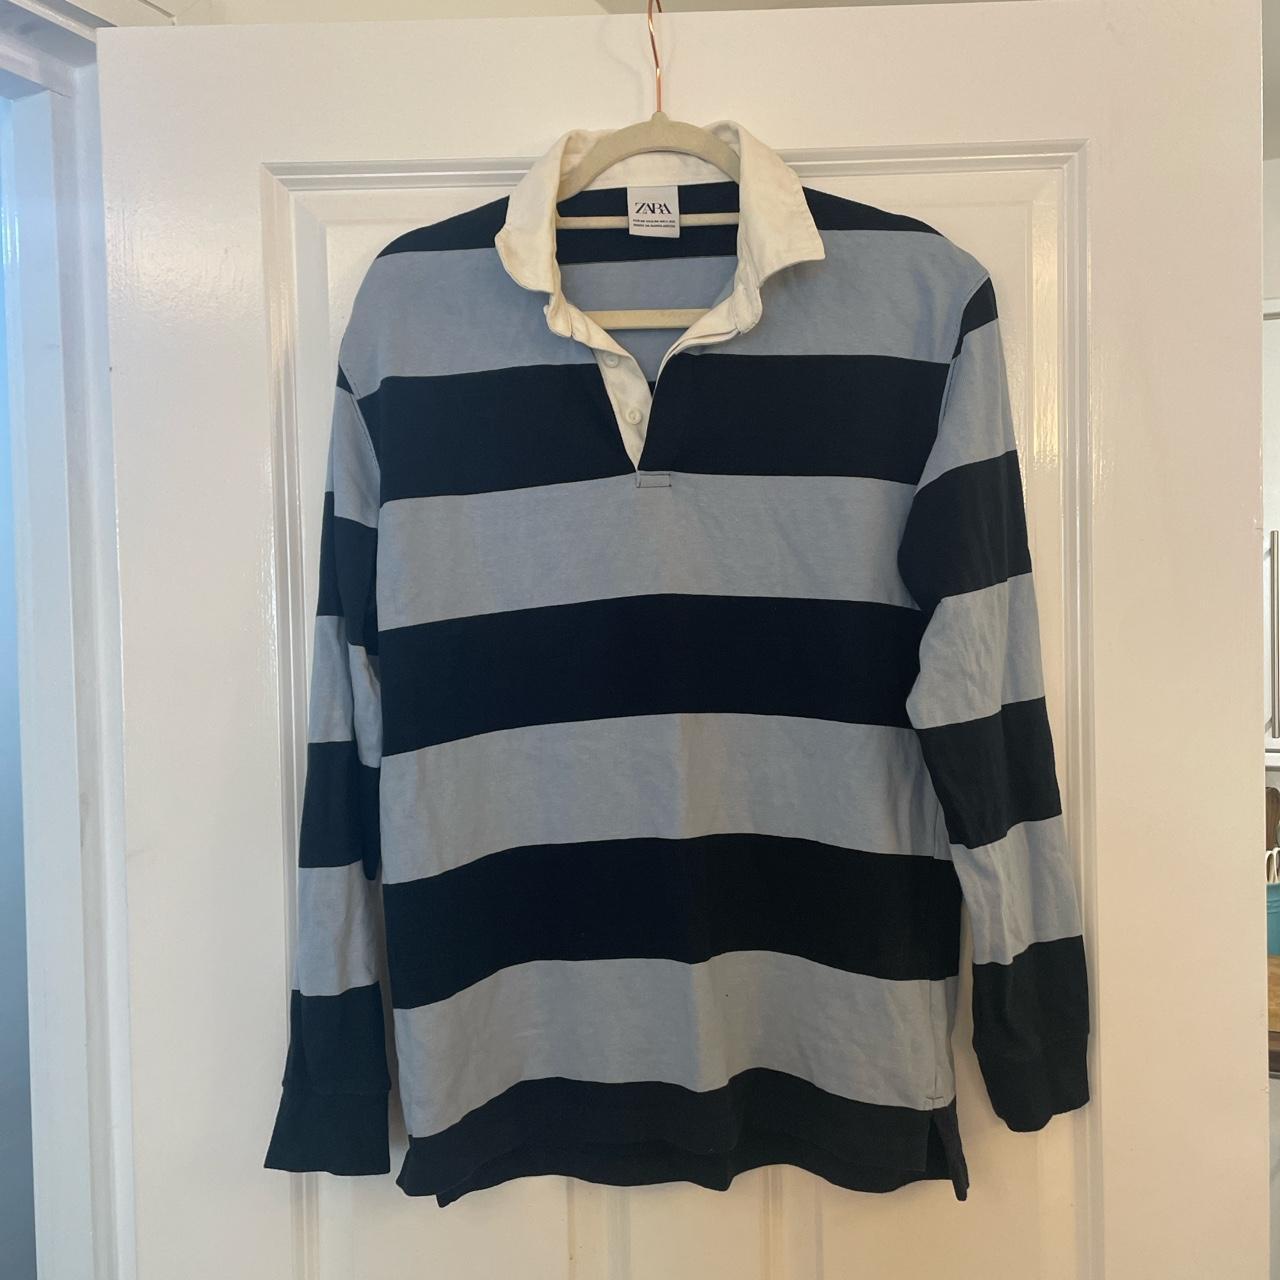 Zara rugby polo long sleeve shirt blue and navy... - Depop